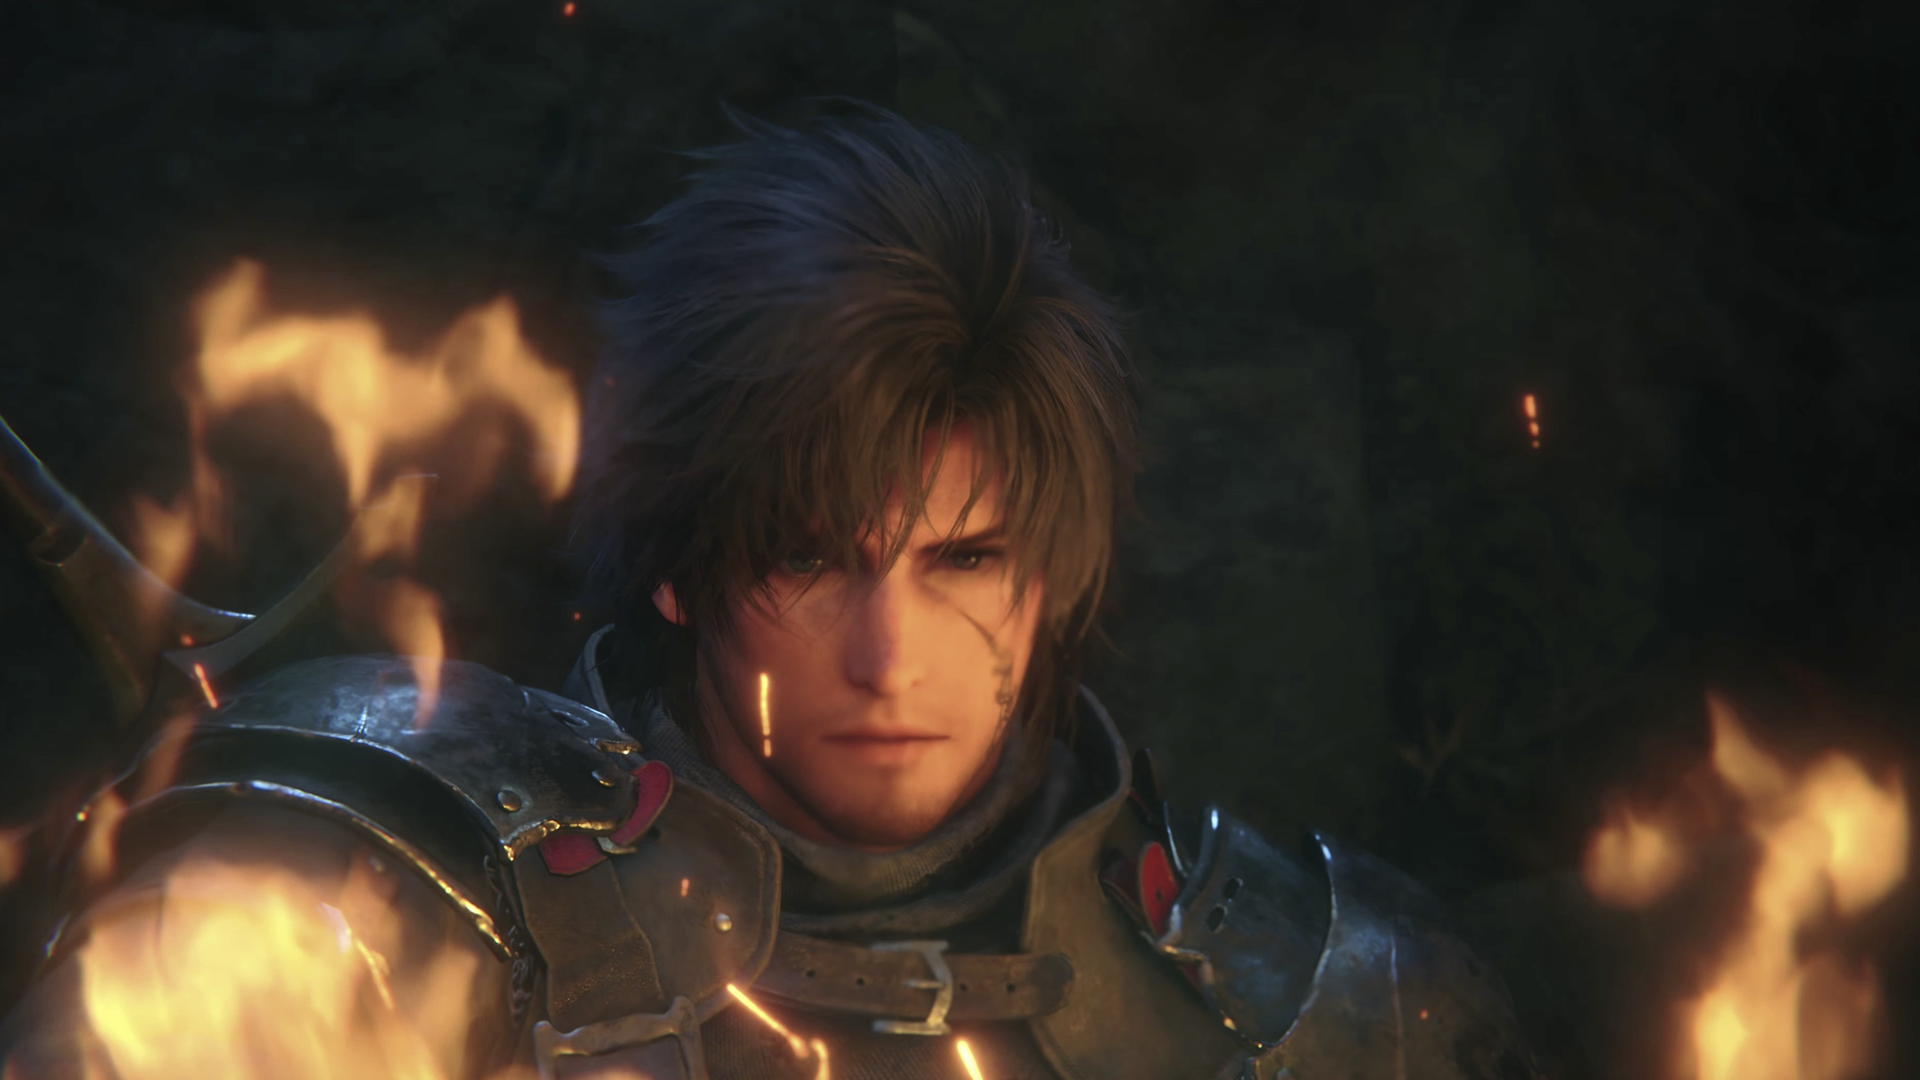 Final Fantasy 16 will be a PS5 exclusive for longer than expected